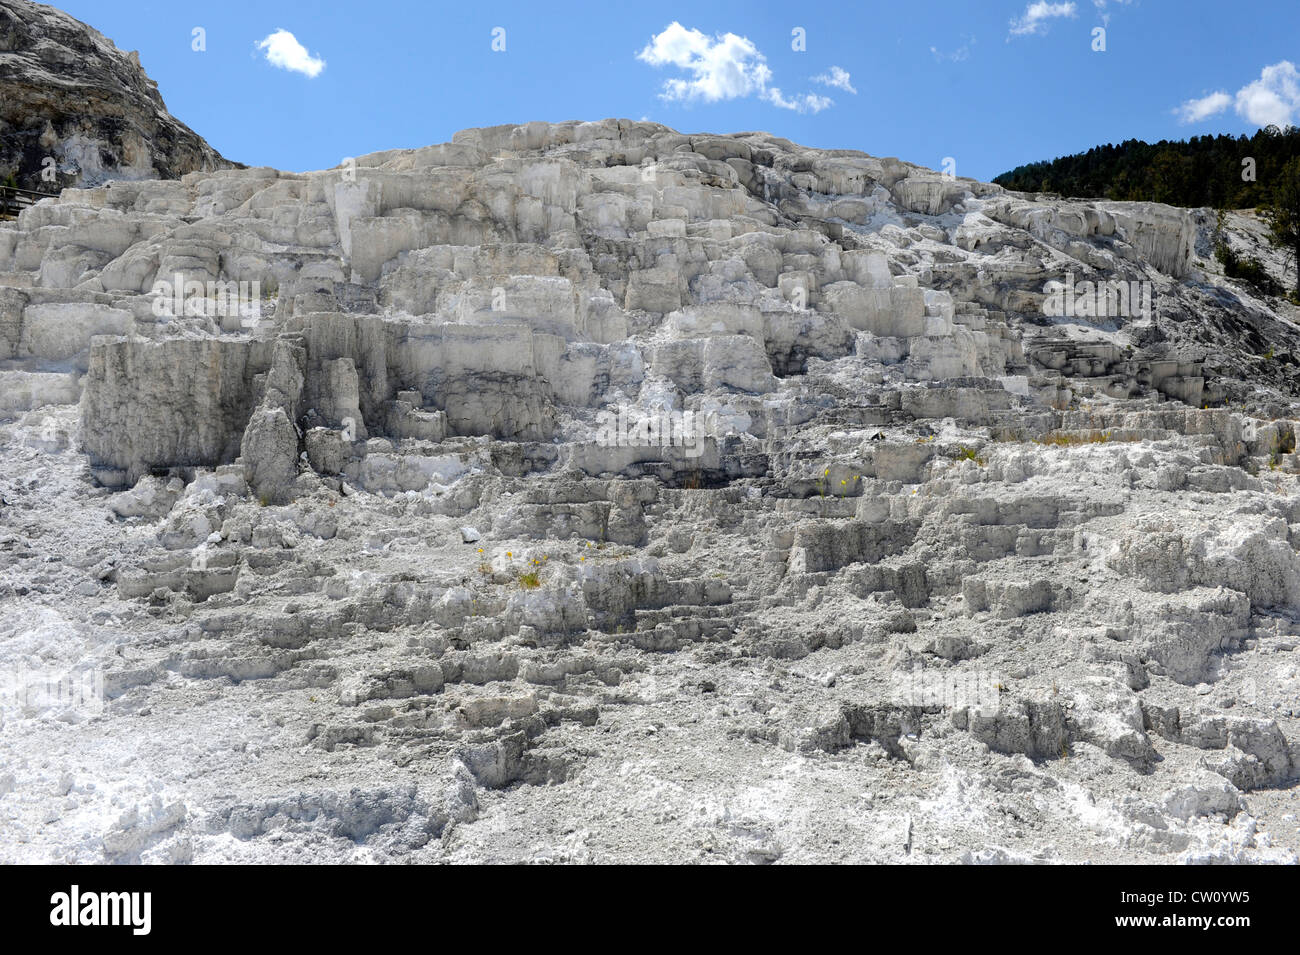 Minerva Terrasse Mammoth Hot Springs Parc National de Yellowstone, Wyoming WY Banque D'Images